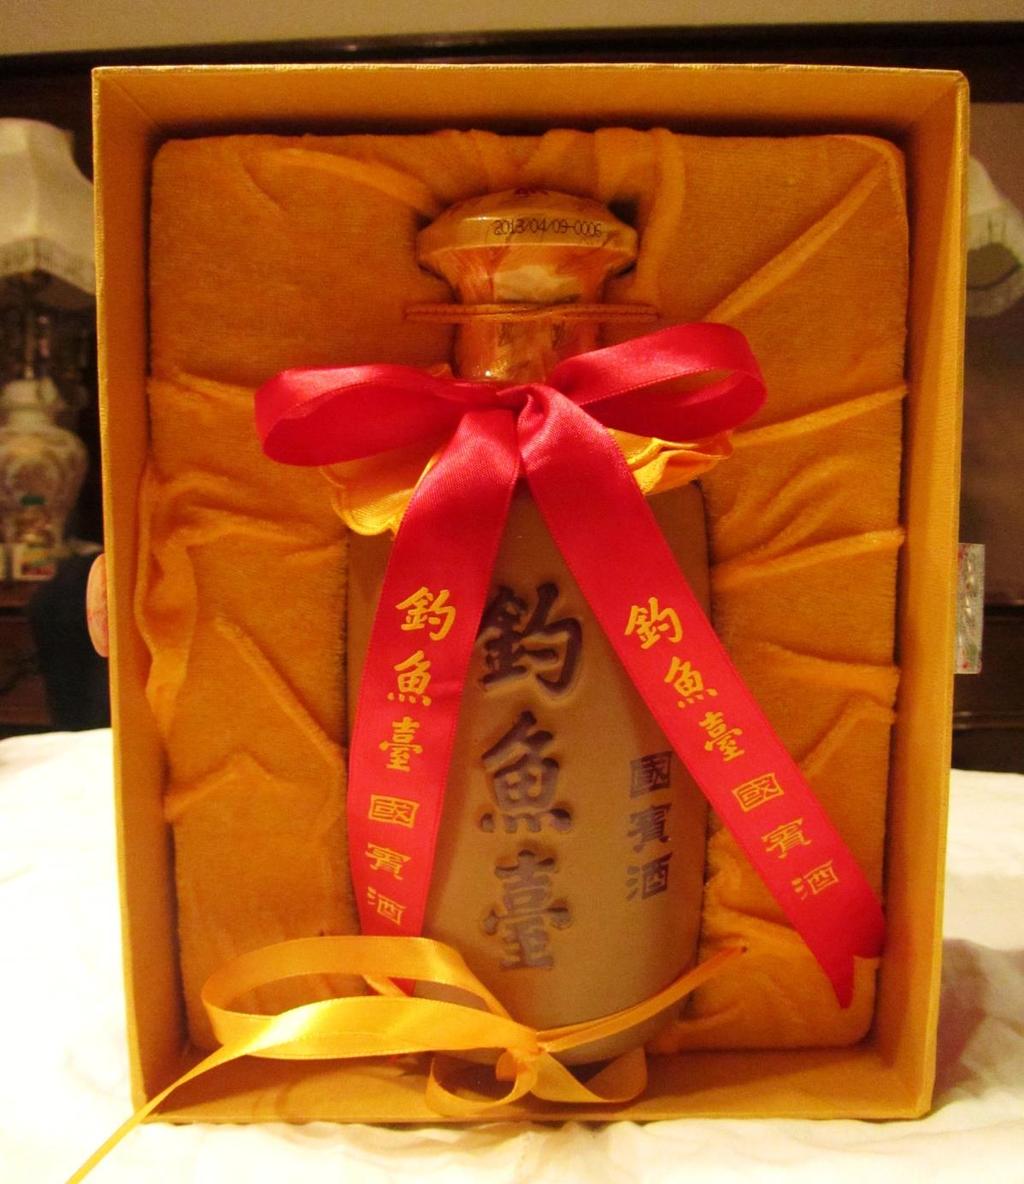 #23 Diaoyutai Produced by the Gweizhou Diaoyutai State Guest Distillery Co., Ltd. in order to meet the demand of domestic and foreign guests for tasting and collecting liquor.